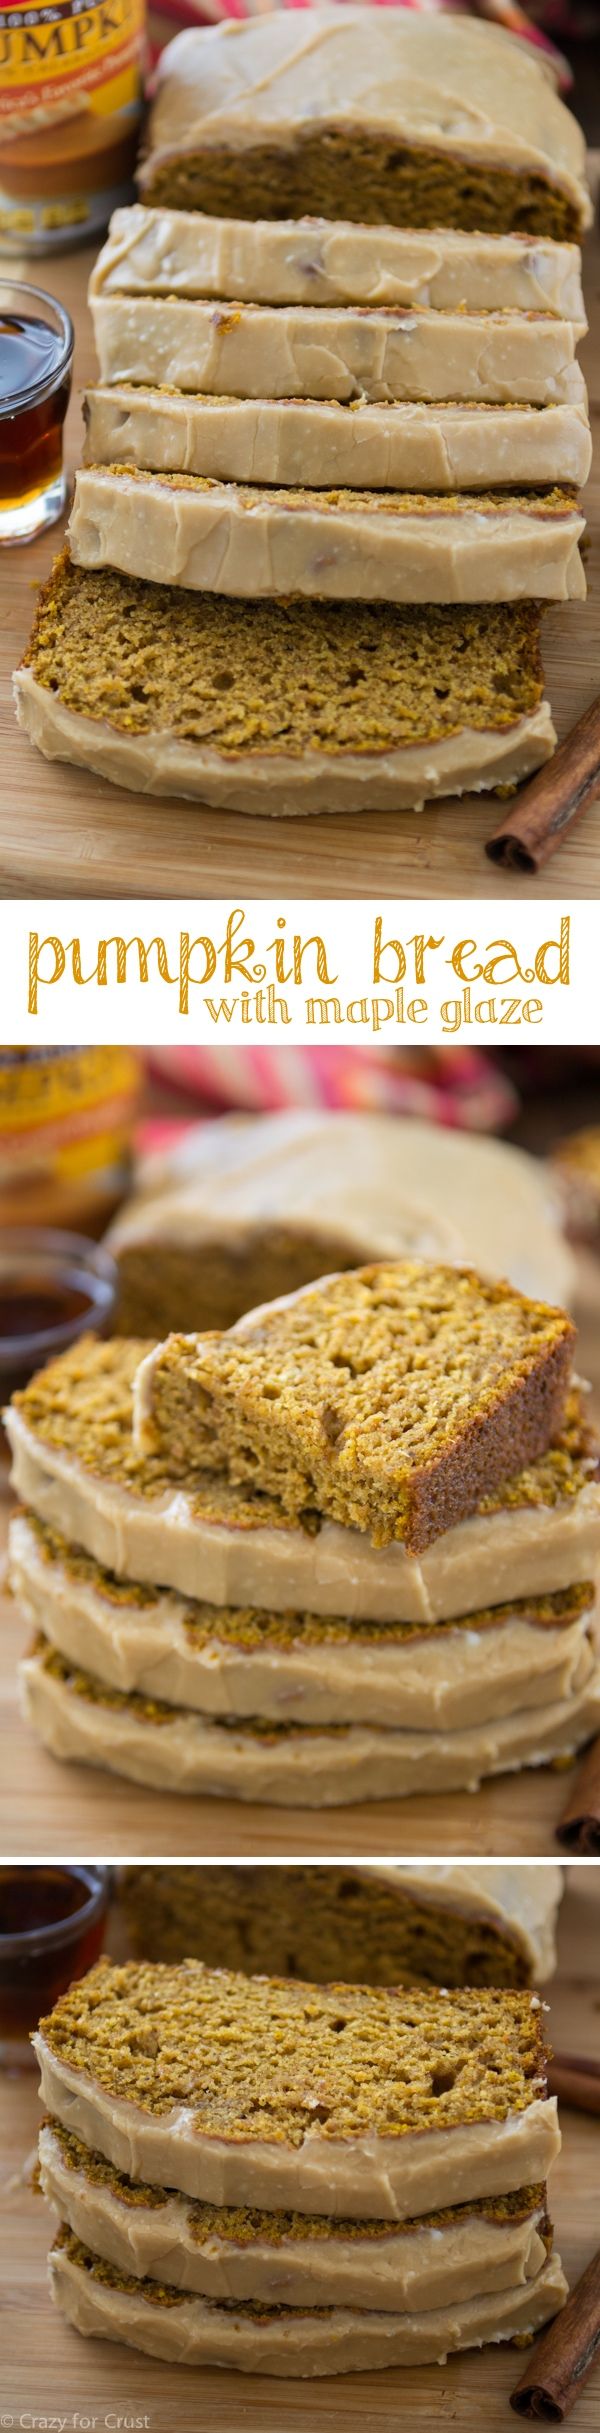 This Pumpkin Bread with Maple Glaze is soft and moist and the perfect pumpkin bread recipe! #vegetarian #recipe #food #recipes #veggie